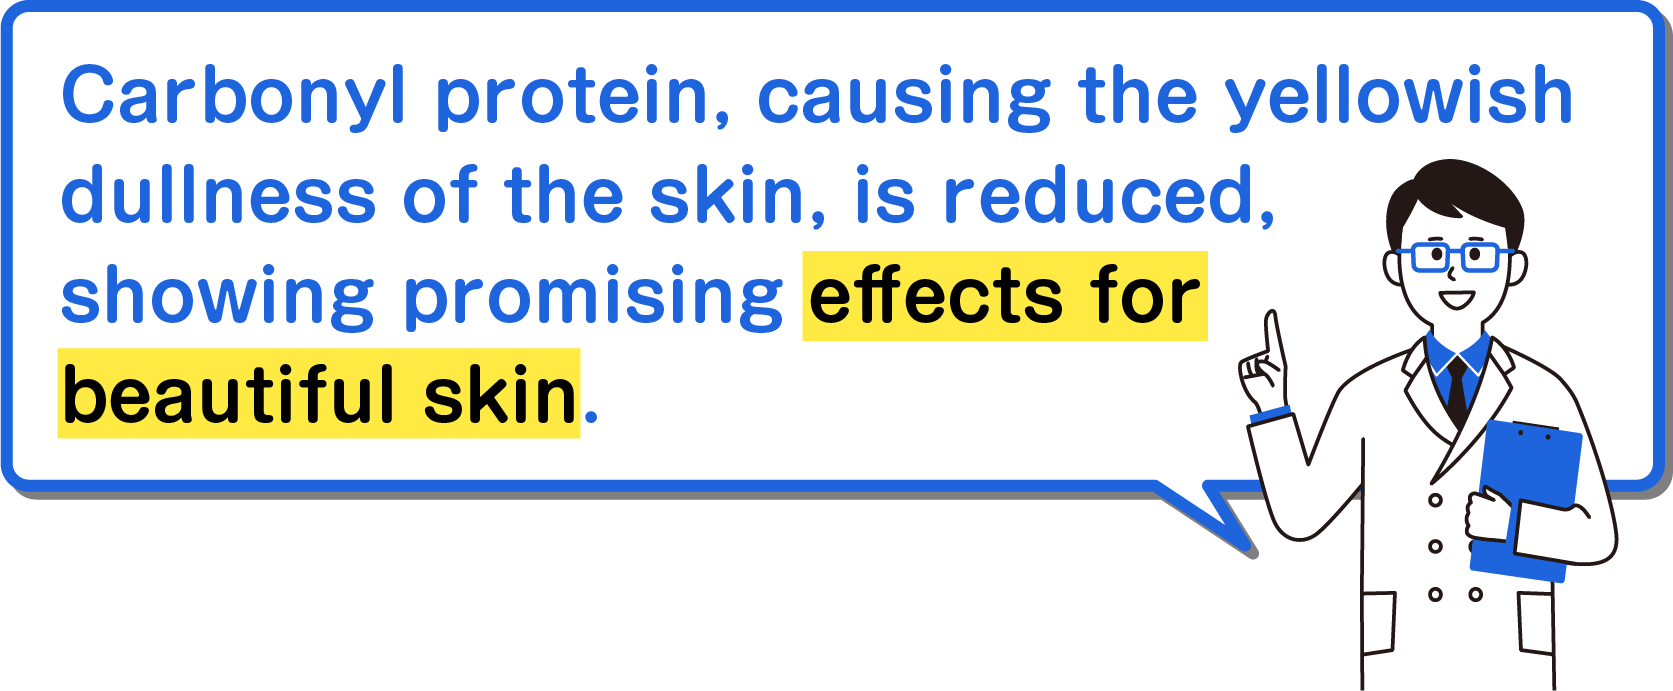 Carbonyl protein, causing the yellowish dullness of the skin, is reduced, showing promising effects for beautiful skin.